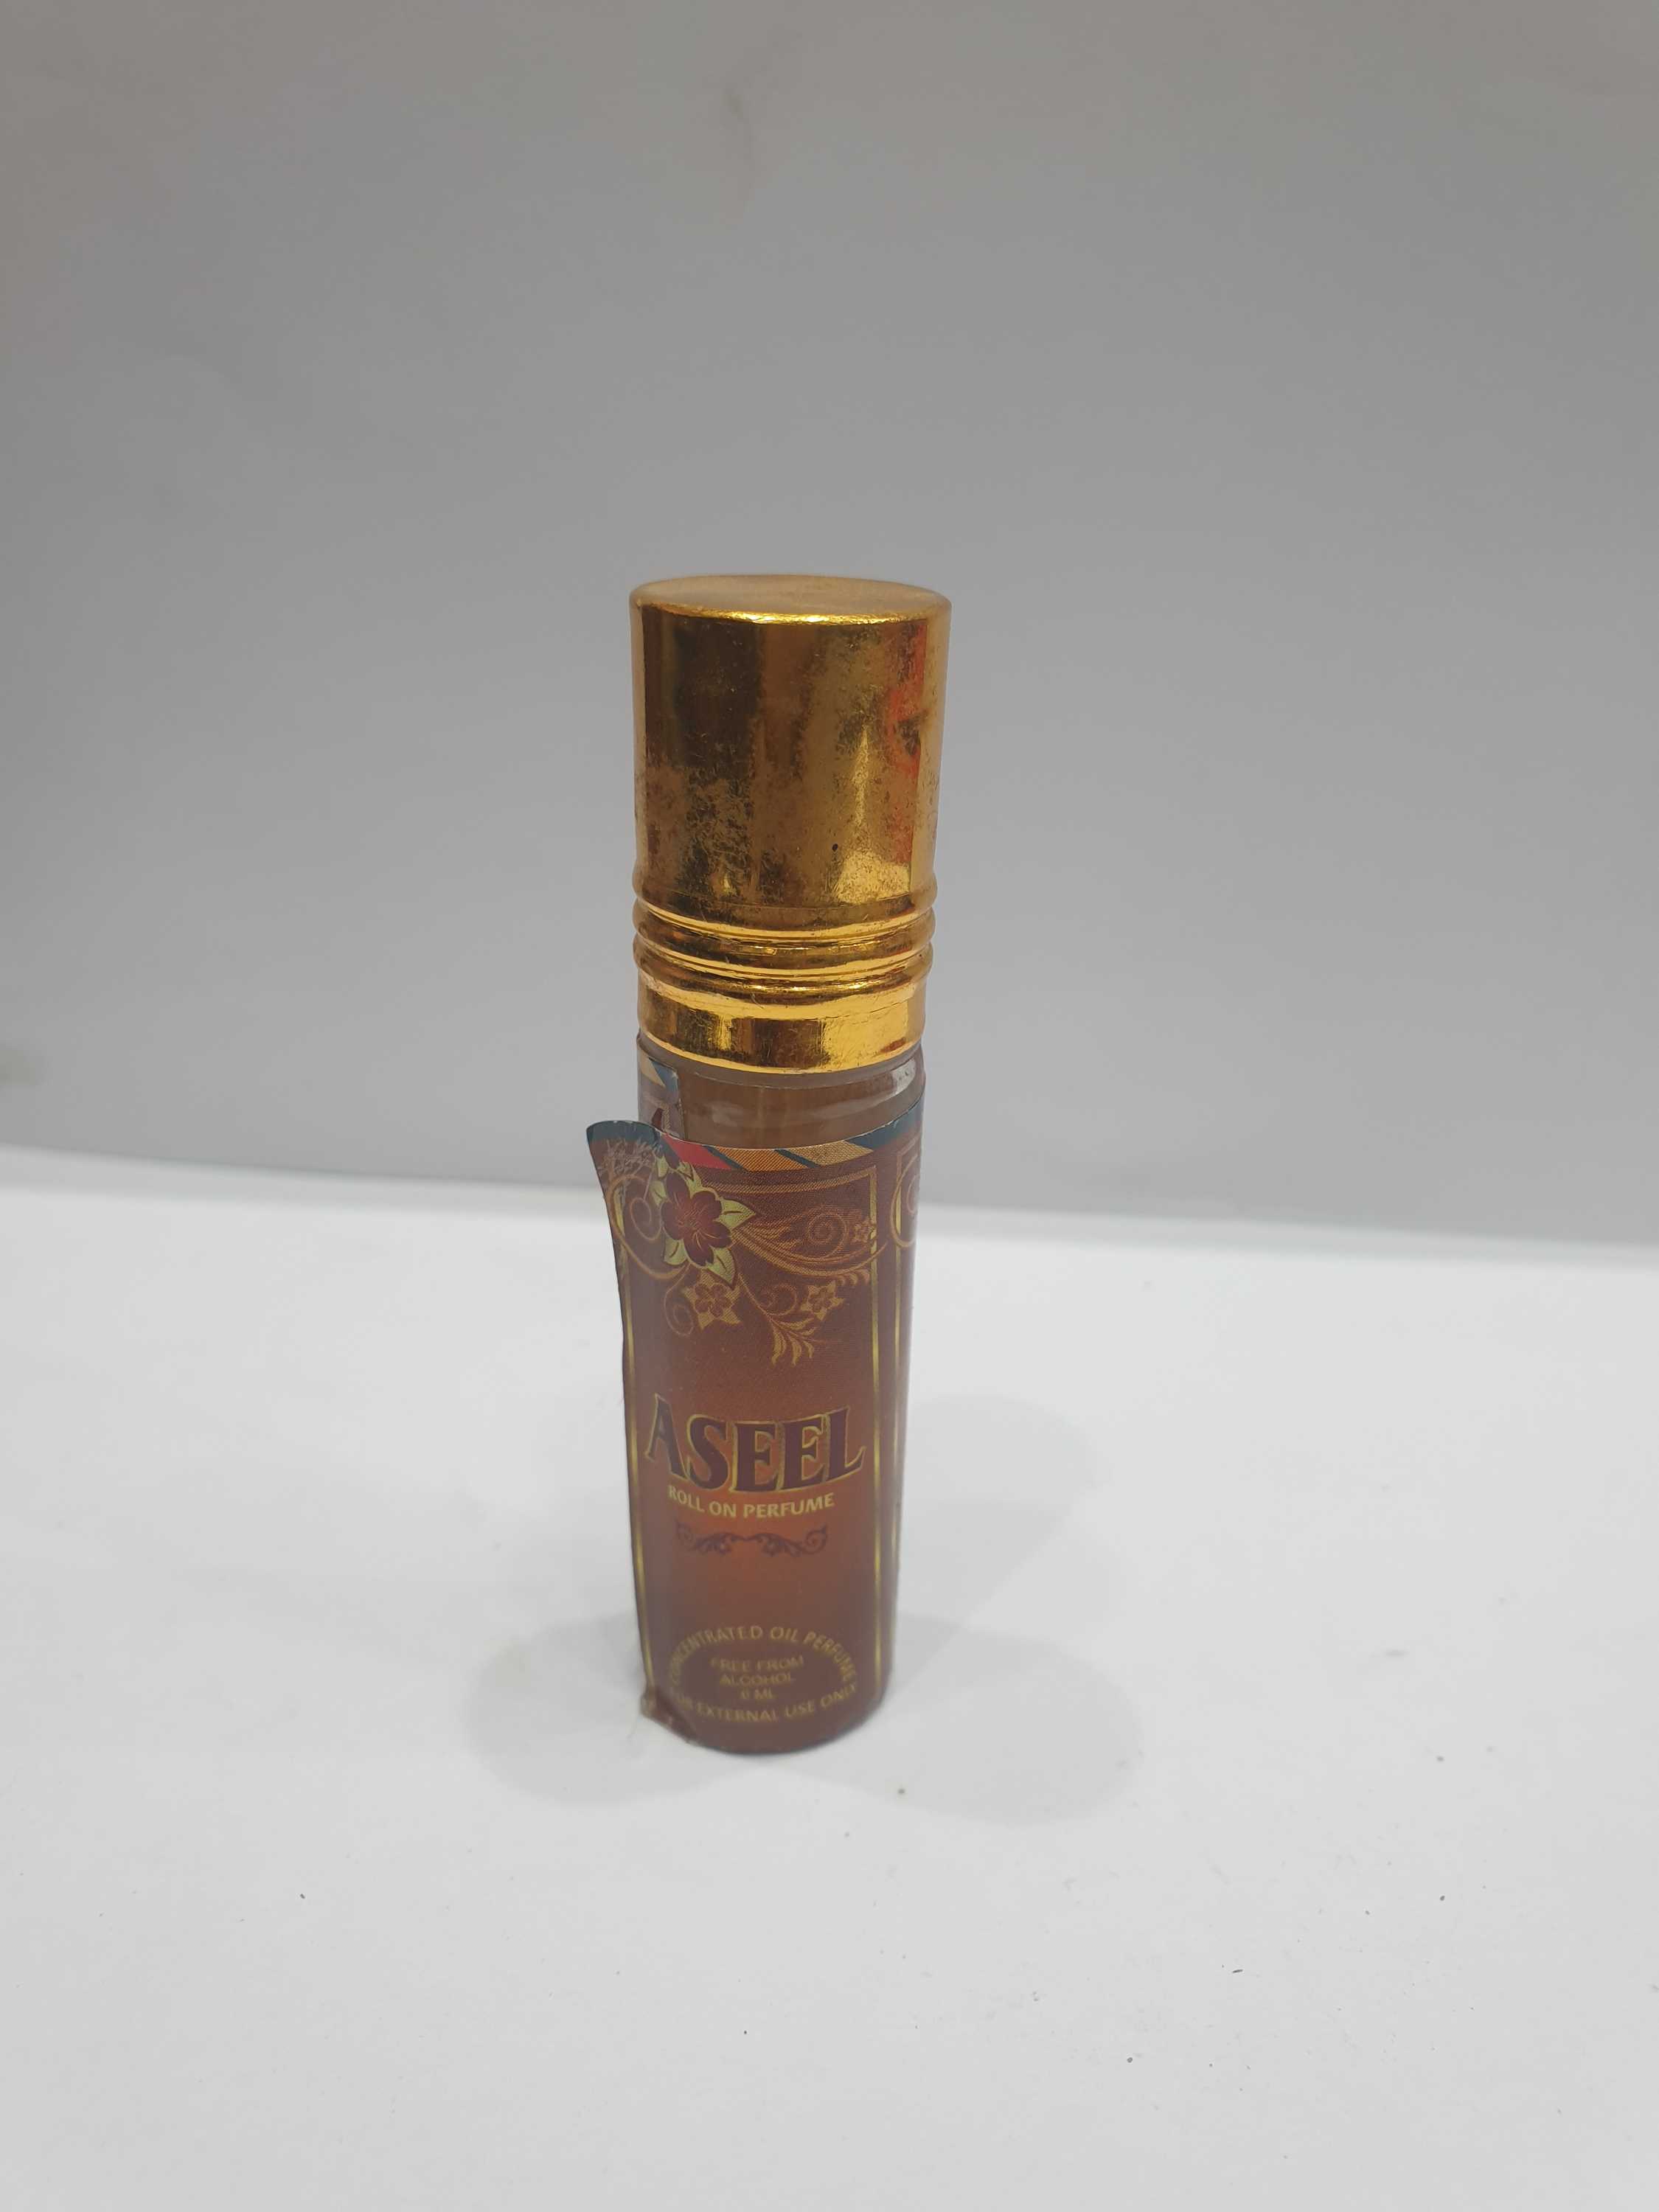 Attar - Handmade Natural Perfume Form Herbal Extract, aseel, 6ml, roll On